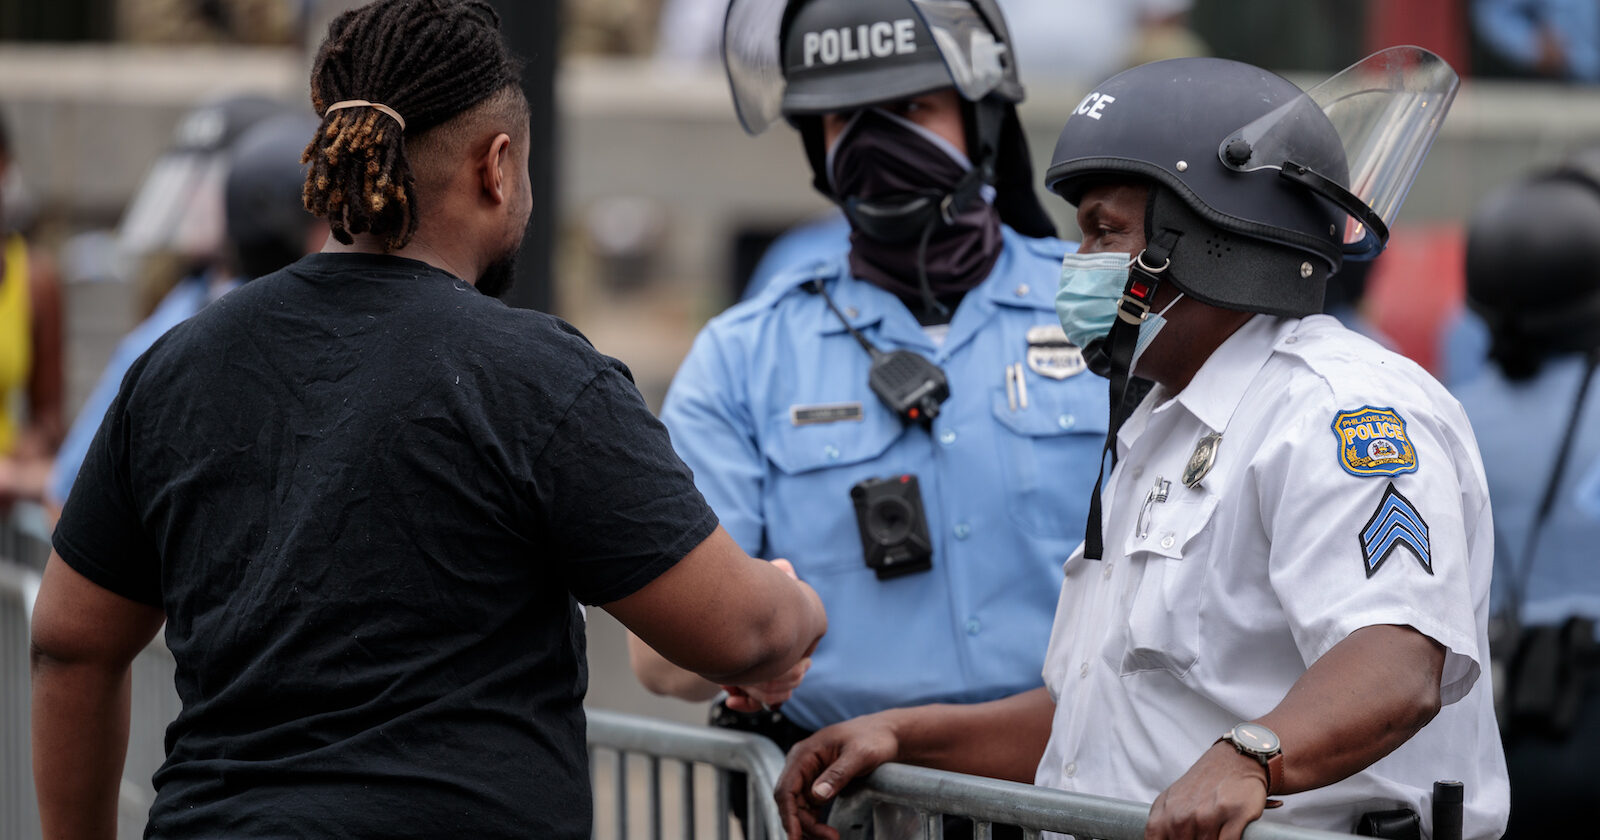 Protestor shaking hands with police officer